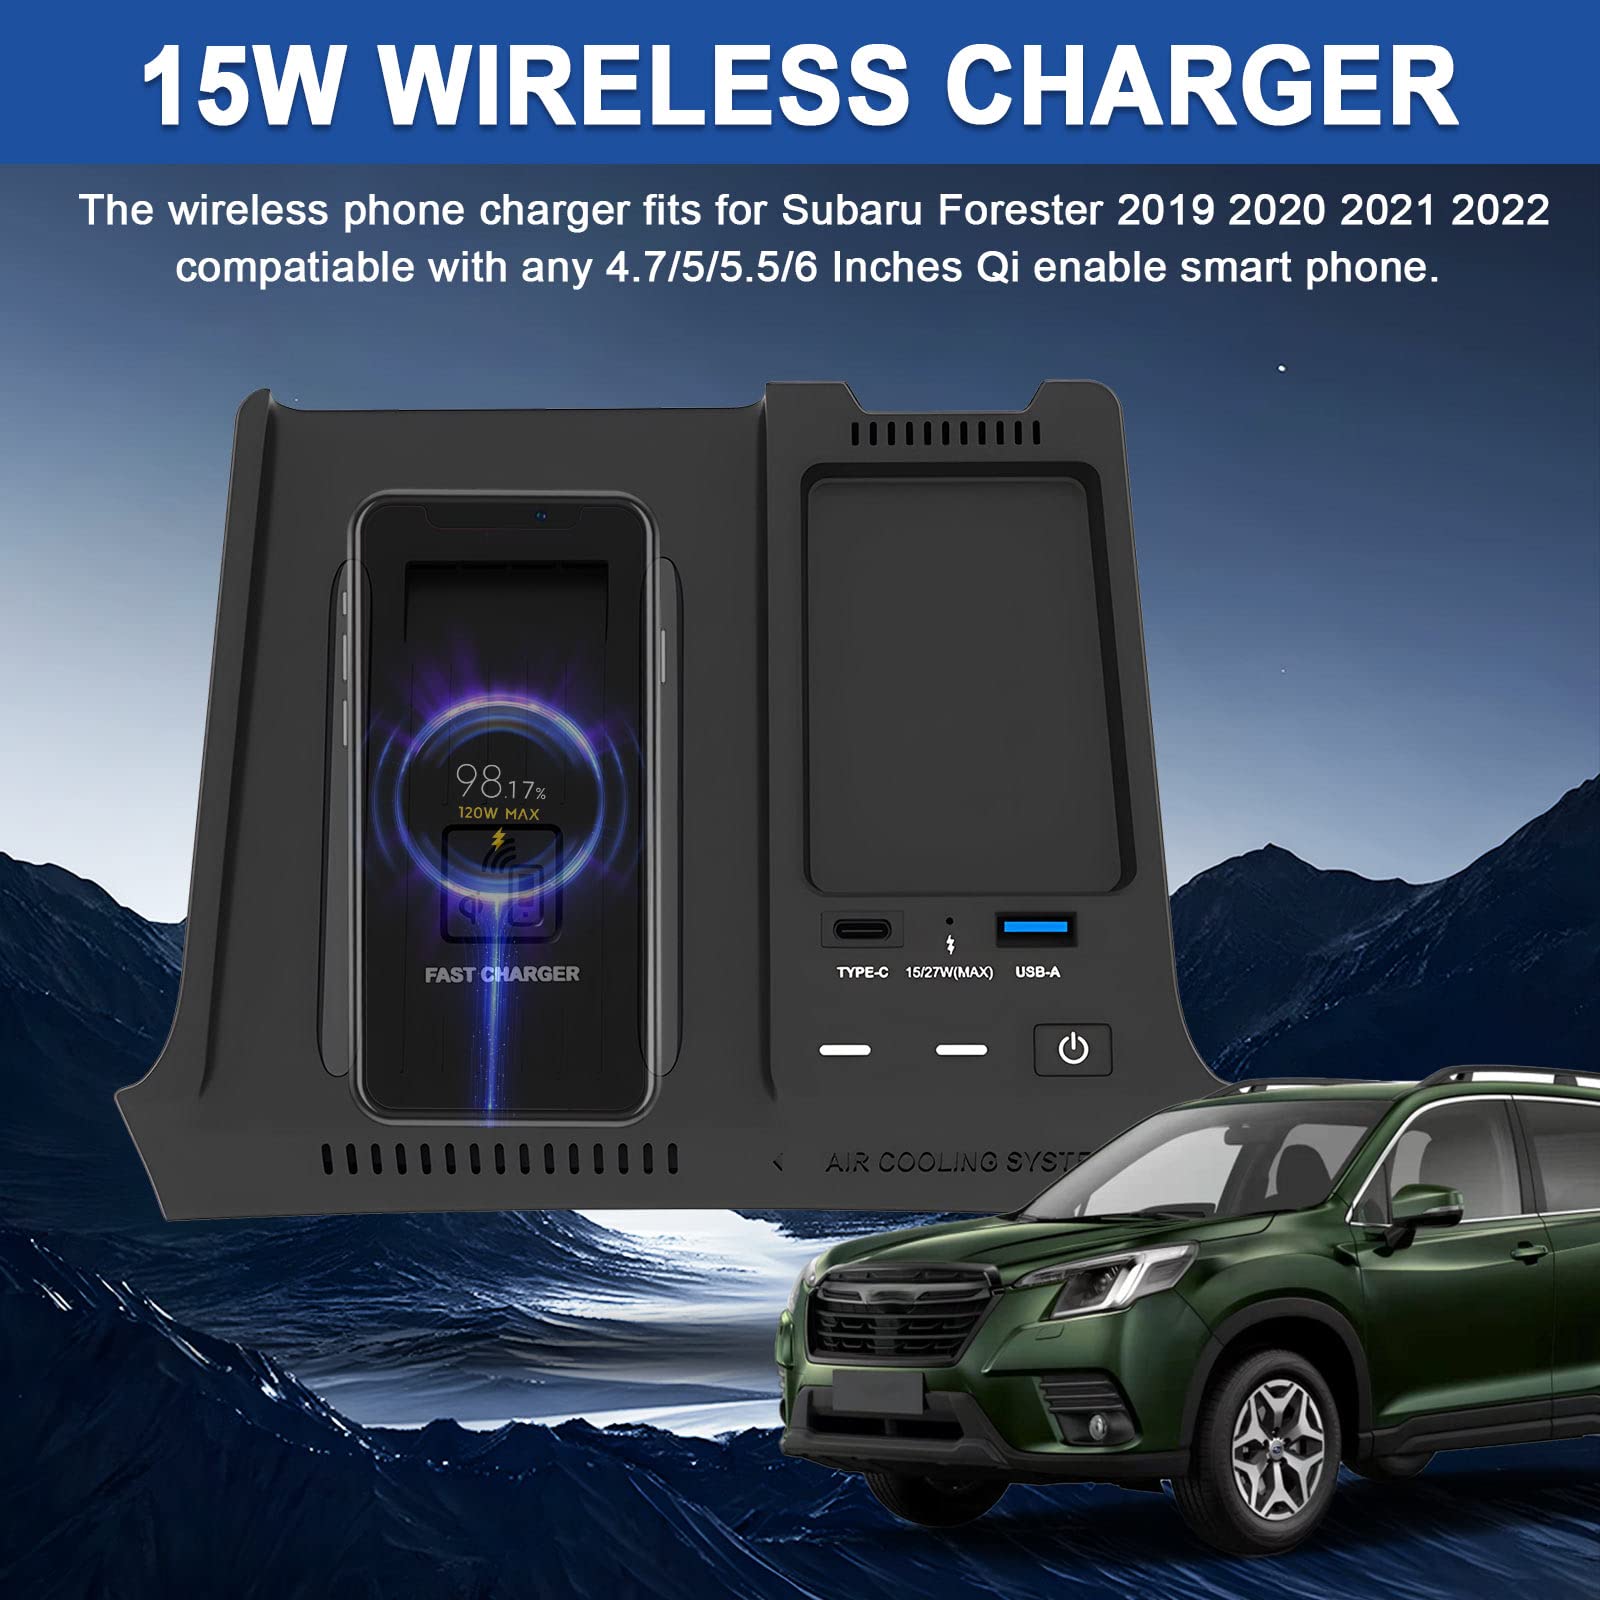 Shademax Custom Fit for 15W Wireless Car Charger Subaru Forester 2023-2021 with Dual Charging Pad 27W USB Port Faster Qi-Enabled Phone Charger Wireless Charging Station for Forester Accessories Black